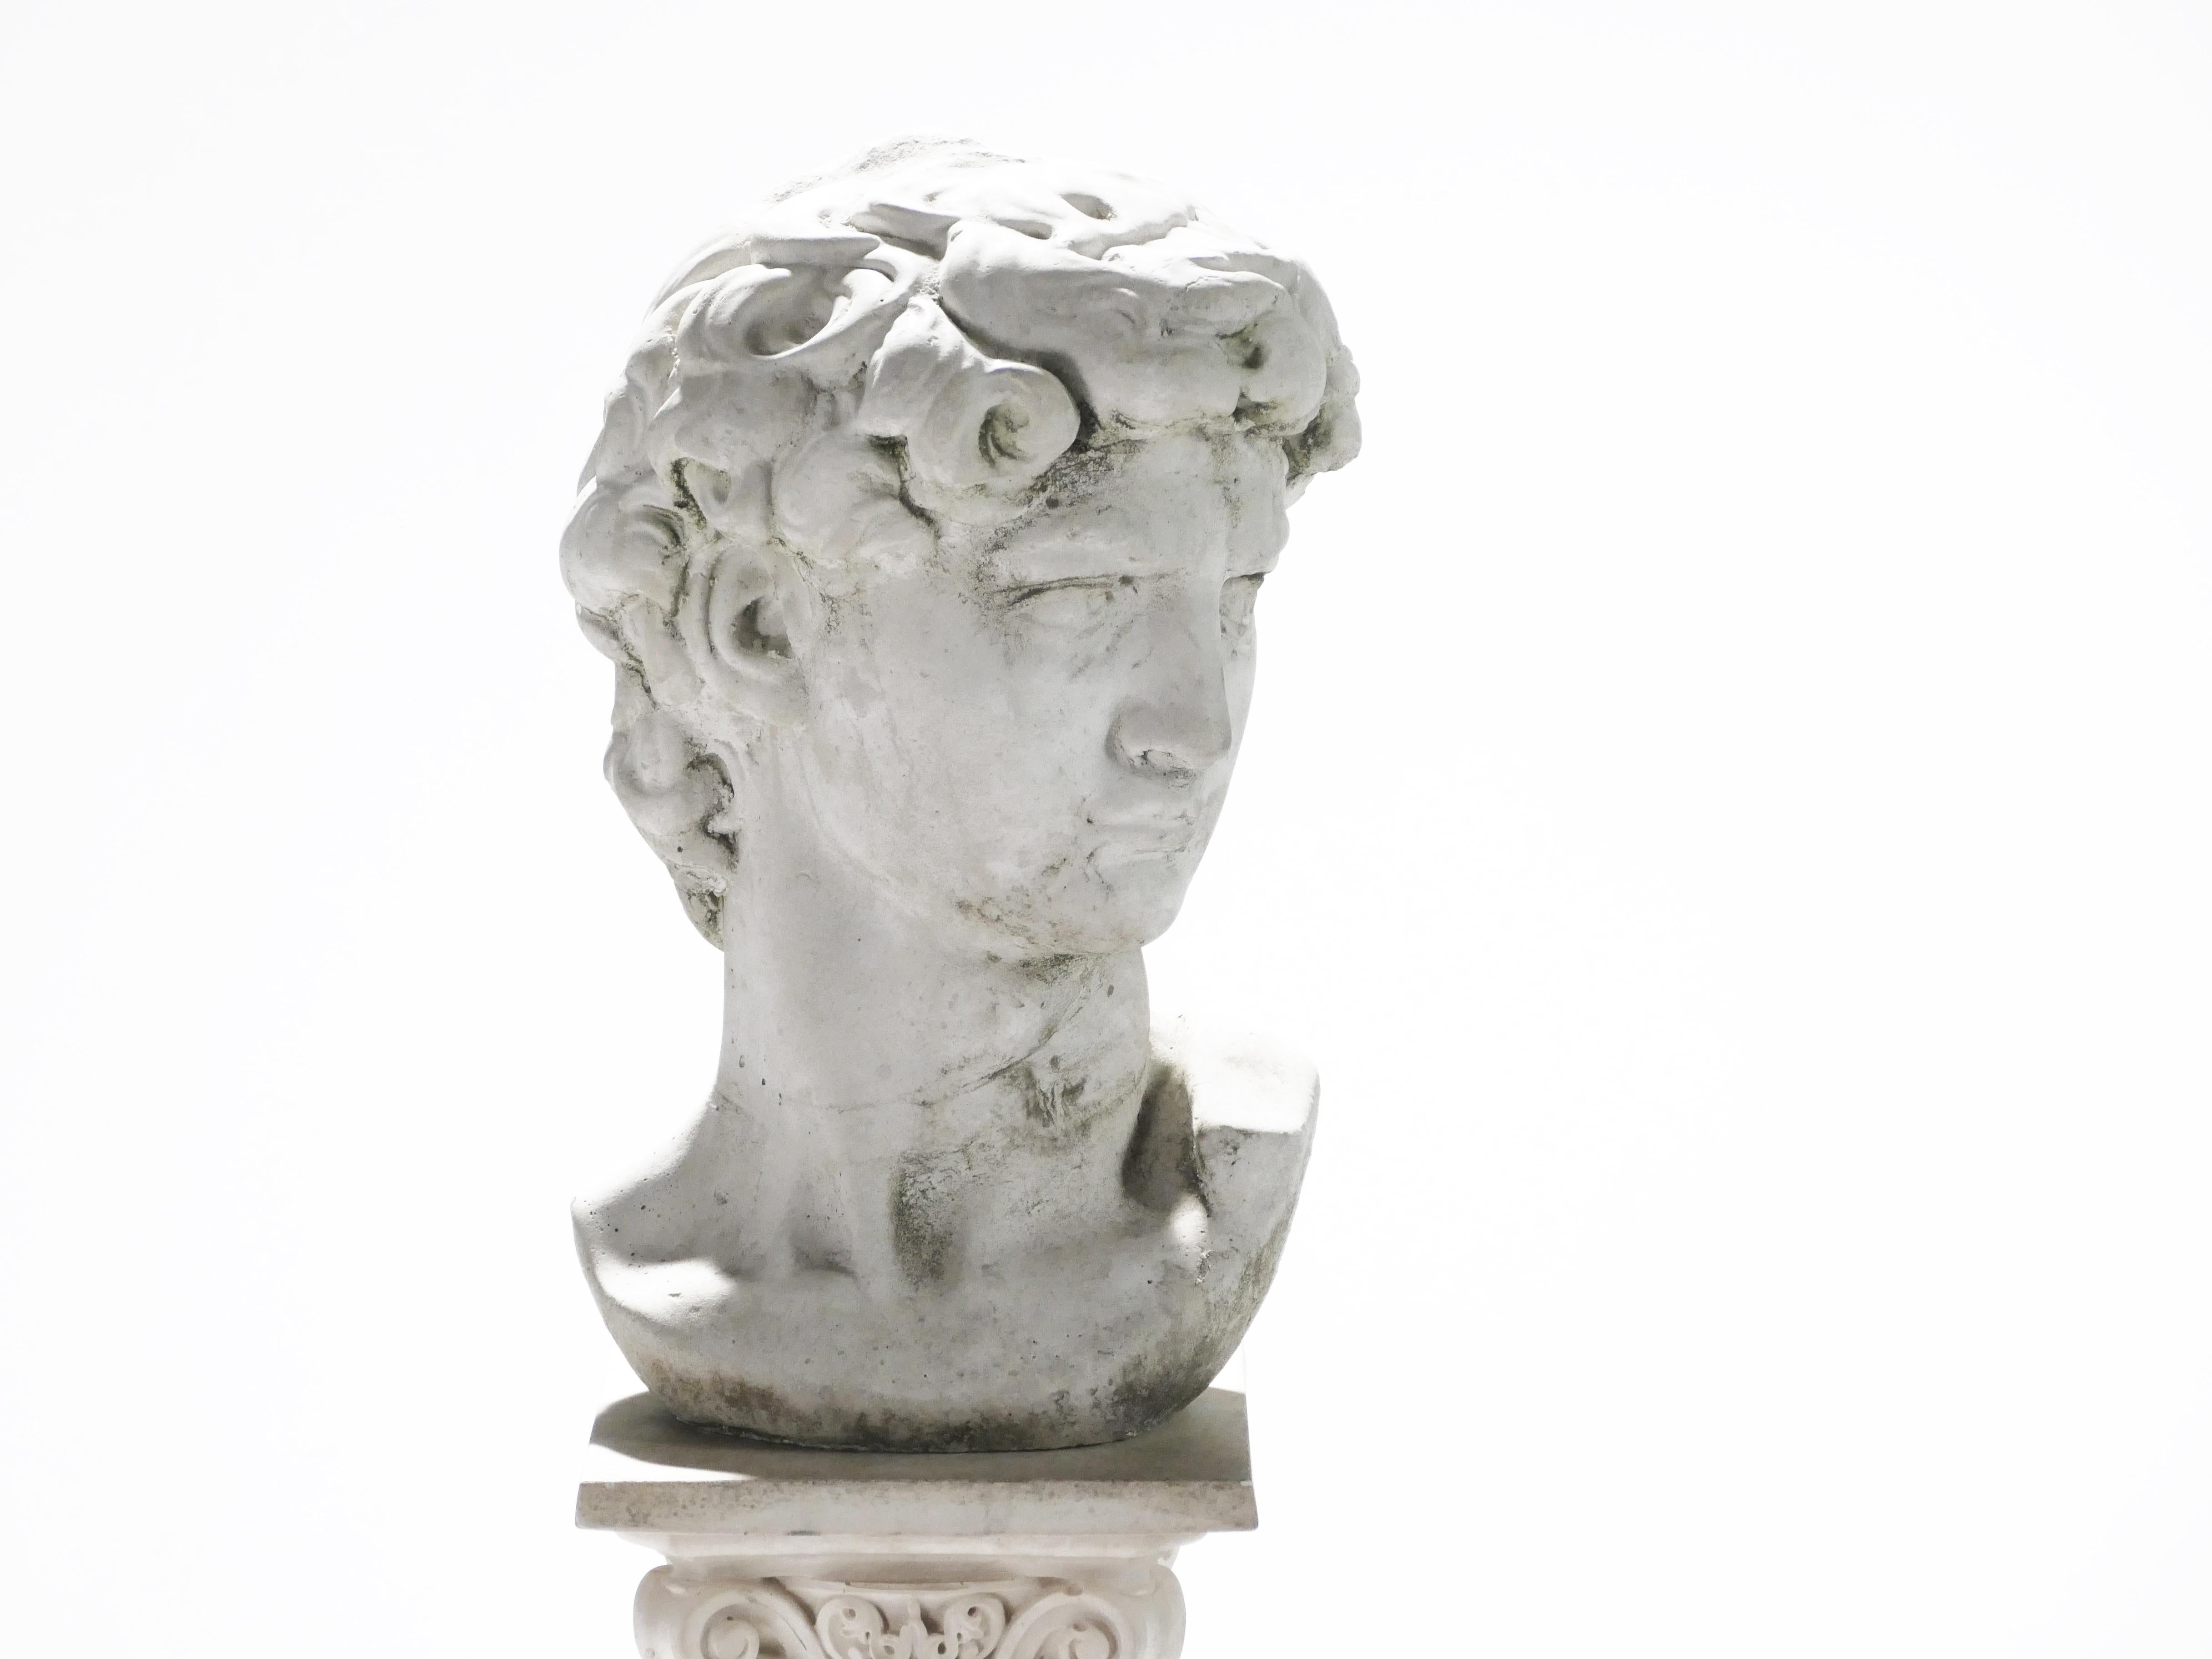 A bust of David sculpted in the 1950s. This plaster sculpture is beautifully neoclassical, with strong lines and Roman inspiration. The piece has a dichotomous bold and reflective energy that would complement a contemporary study or living room. The